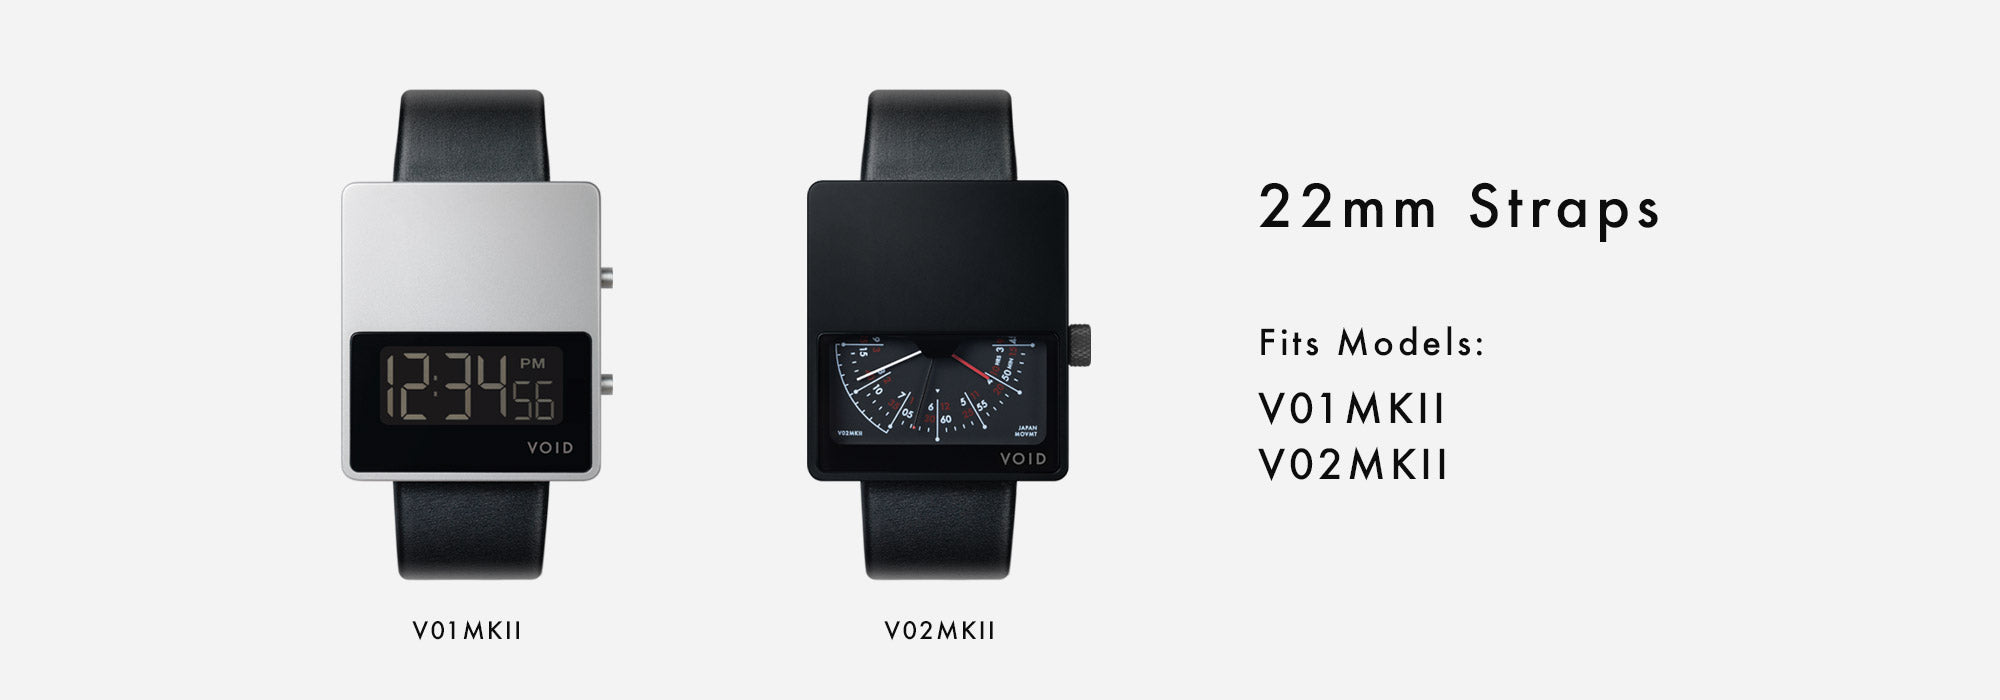 VOID Watches 22mm Straps - Fits the V01MKII and V02MKII